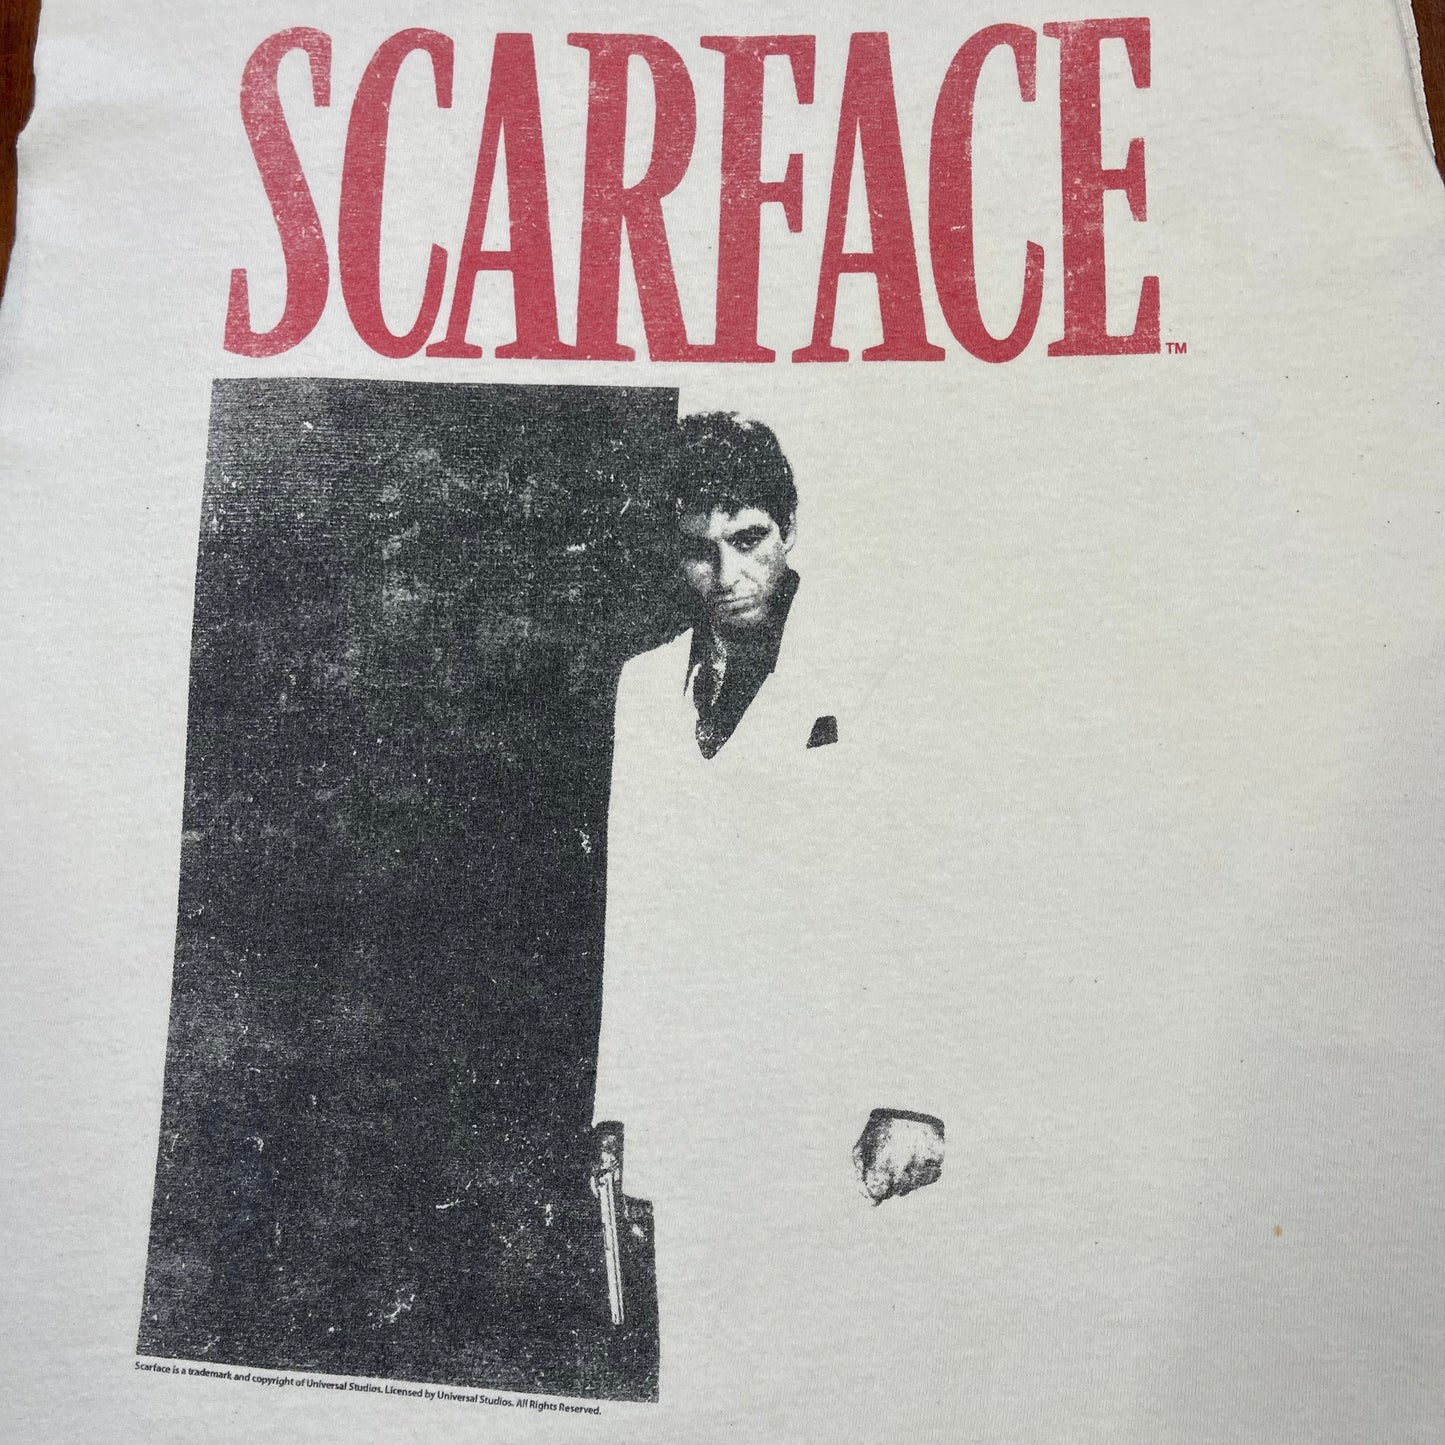 THRIFTED SCARFACE CUT-UP TANK